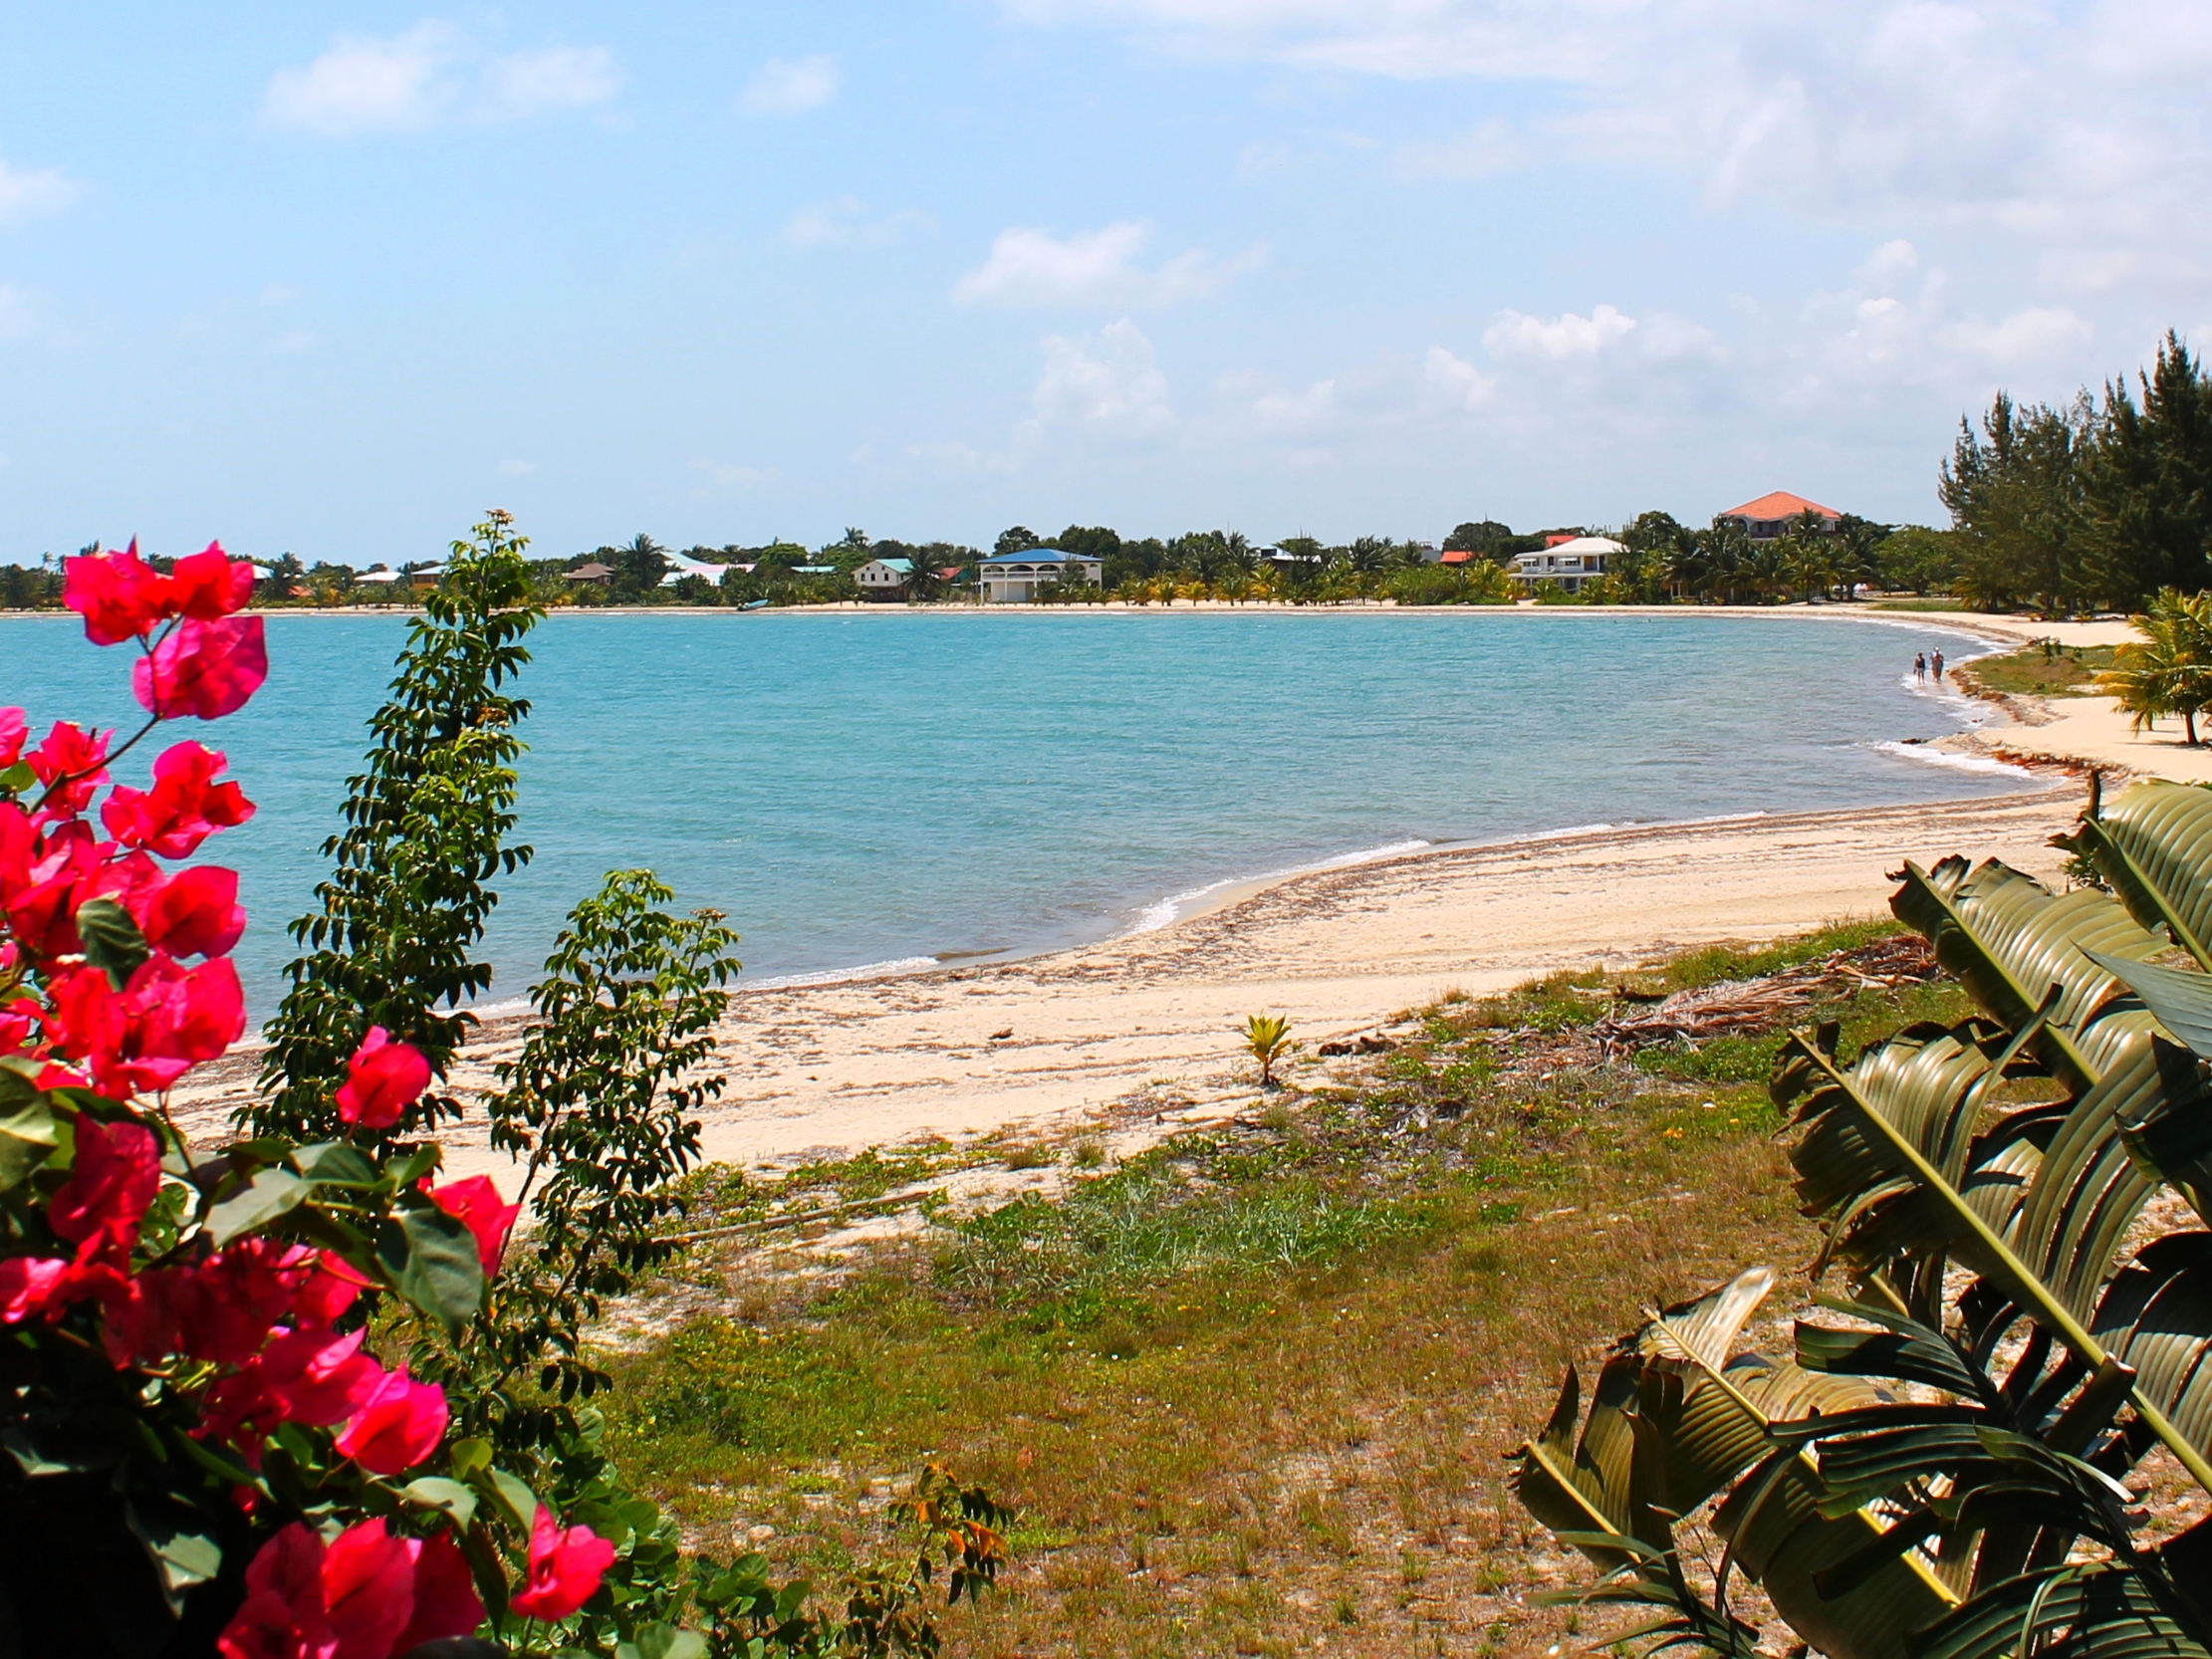 Take a stroll along the lovely Placencia Beach